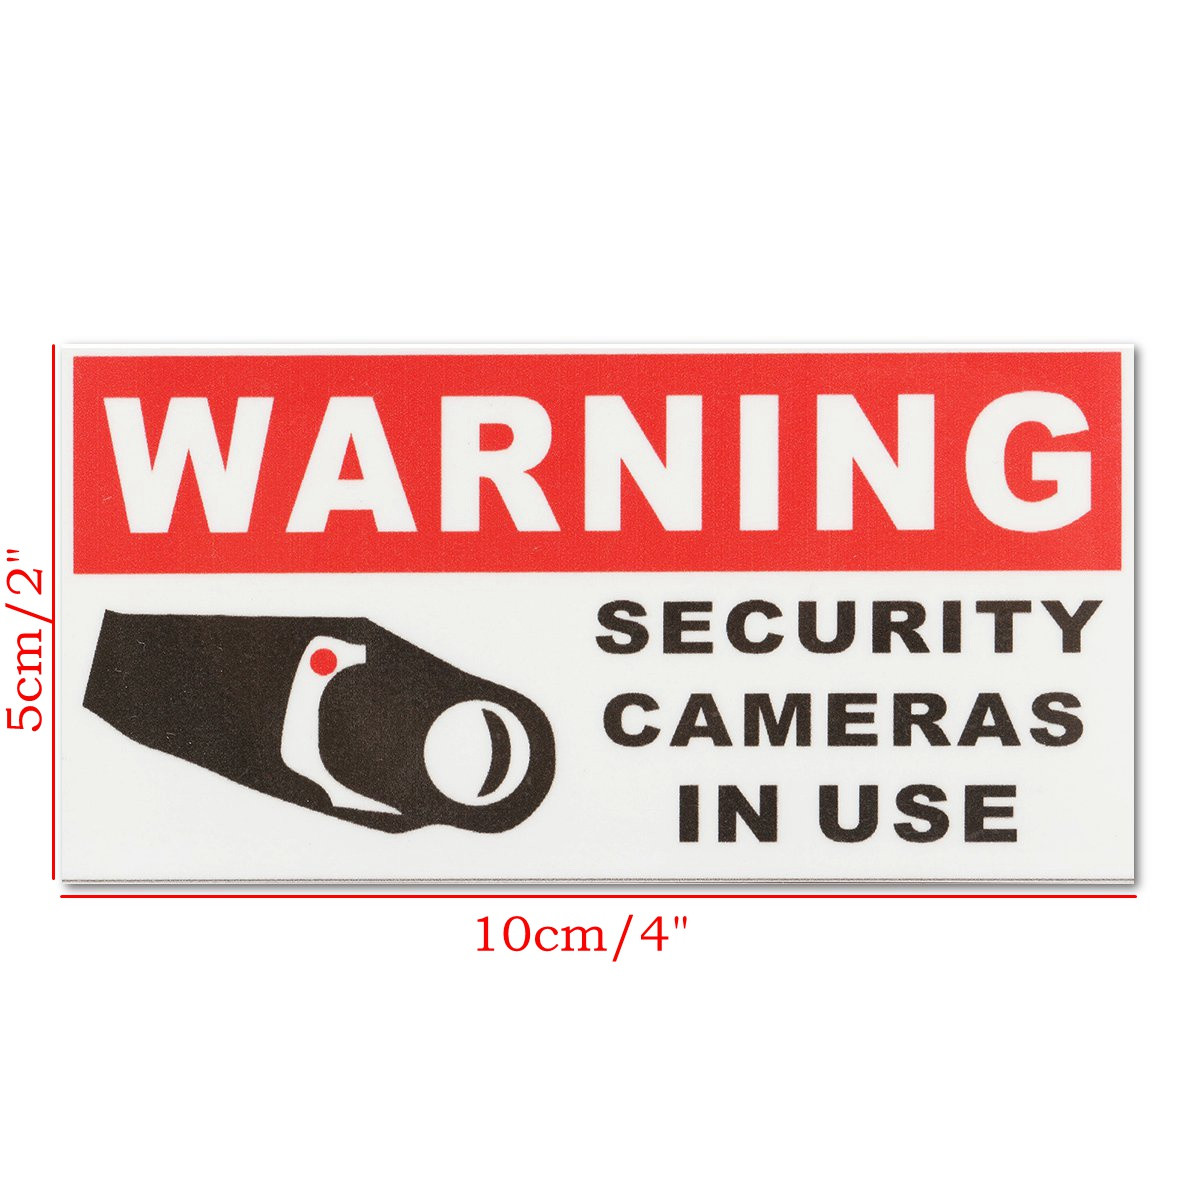 8Pcs-Security-Camera-In-Use-Self-adhensive-Stickers-Safety-Signs-Decal-Waterproof-1094020-9